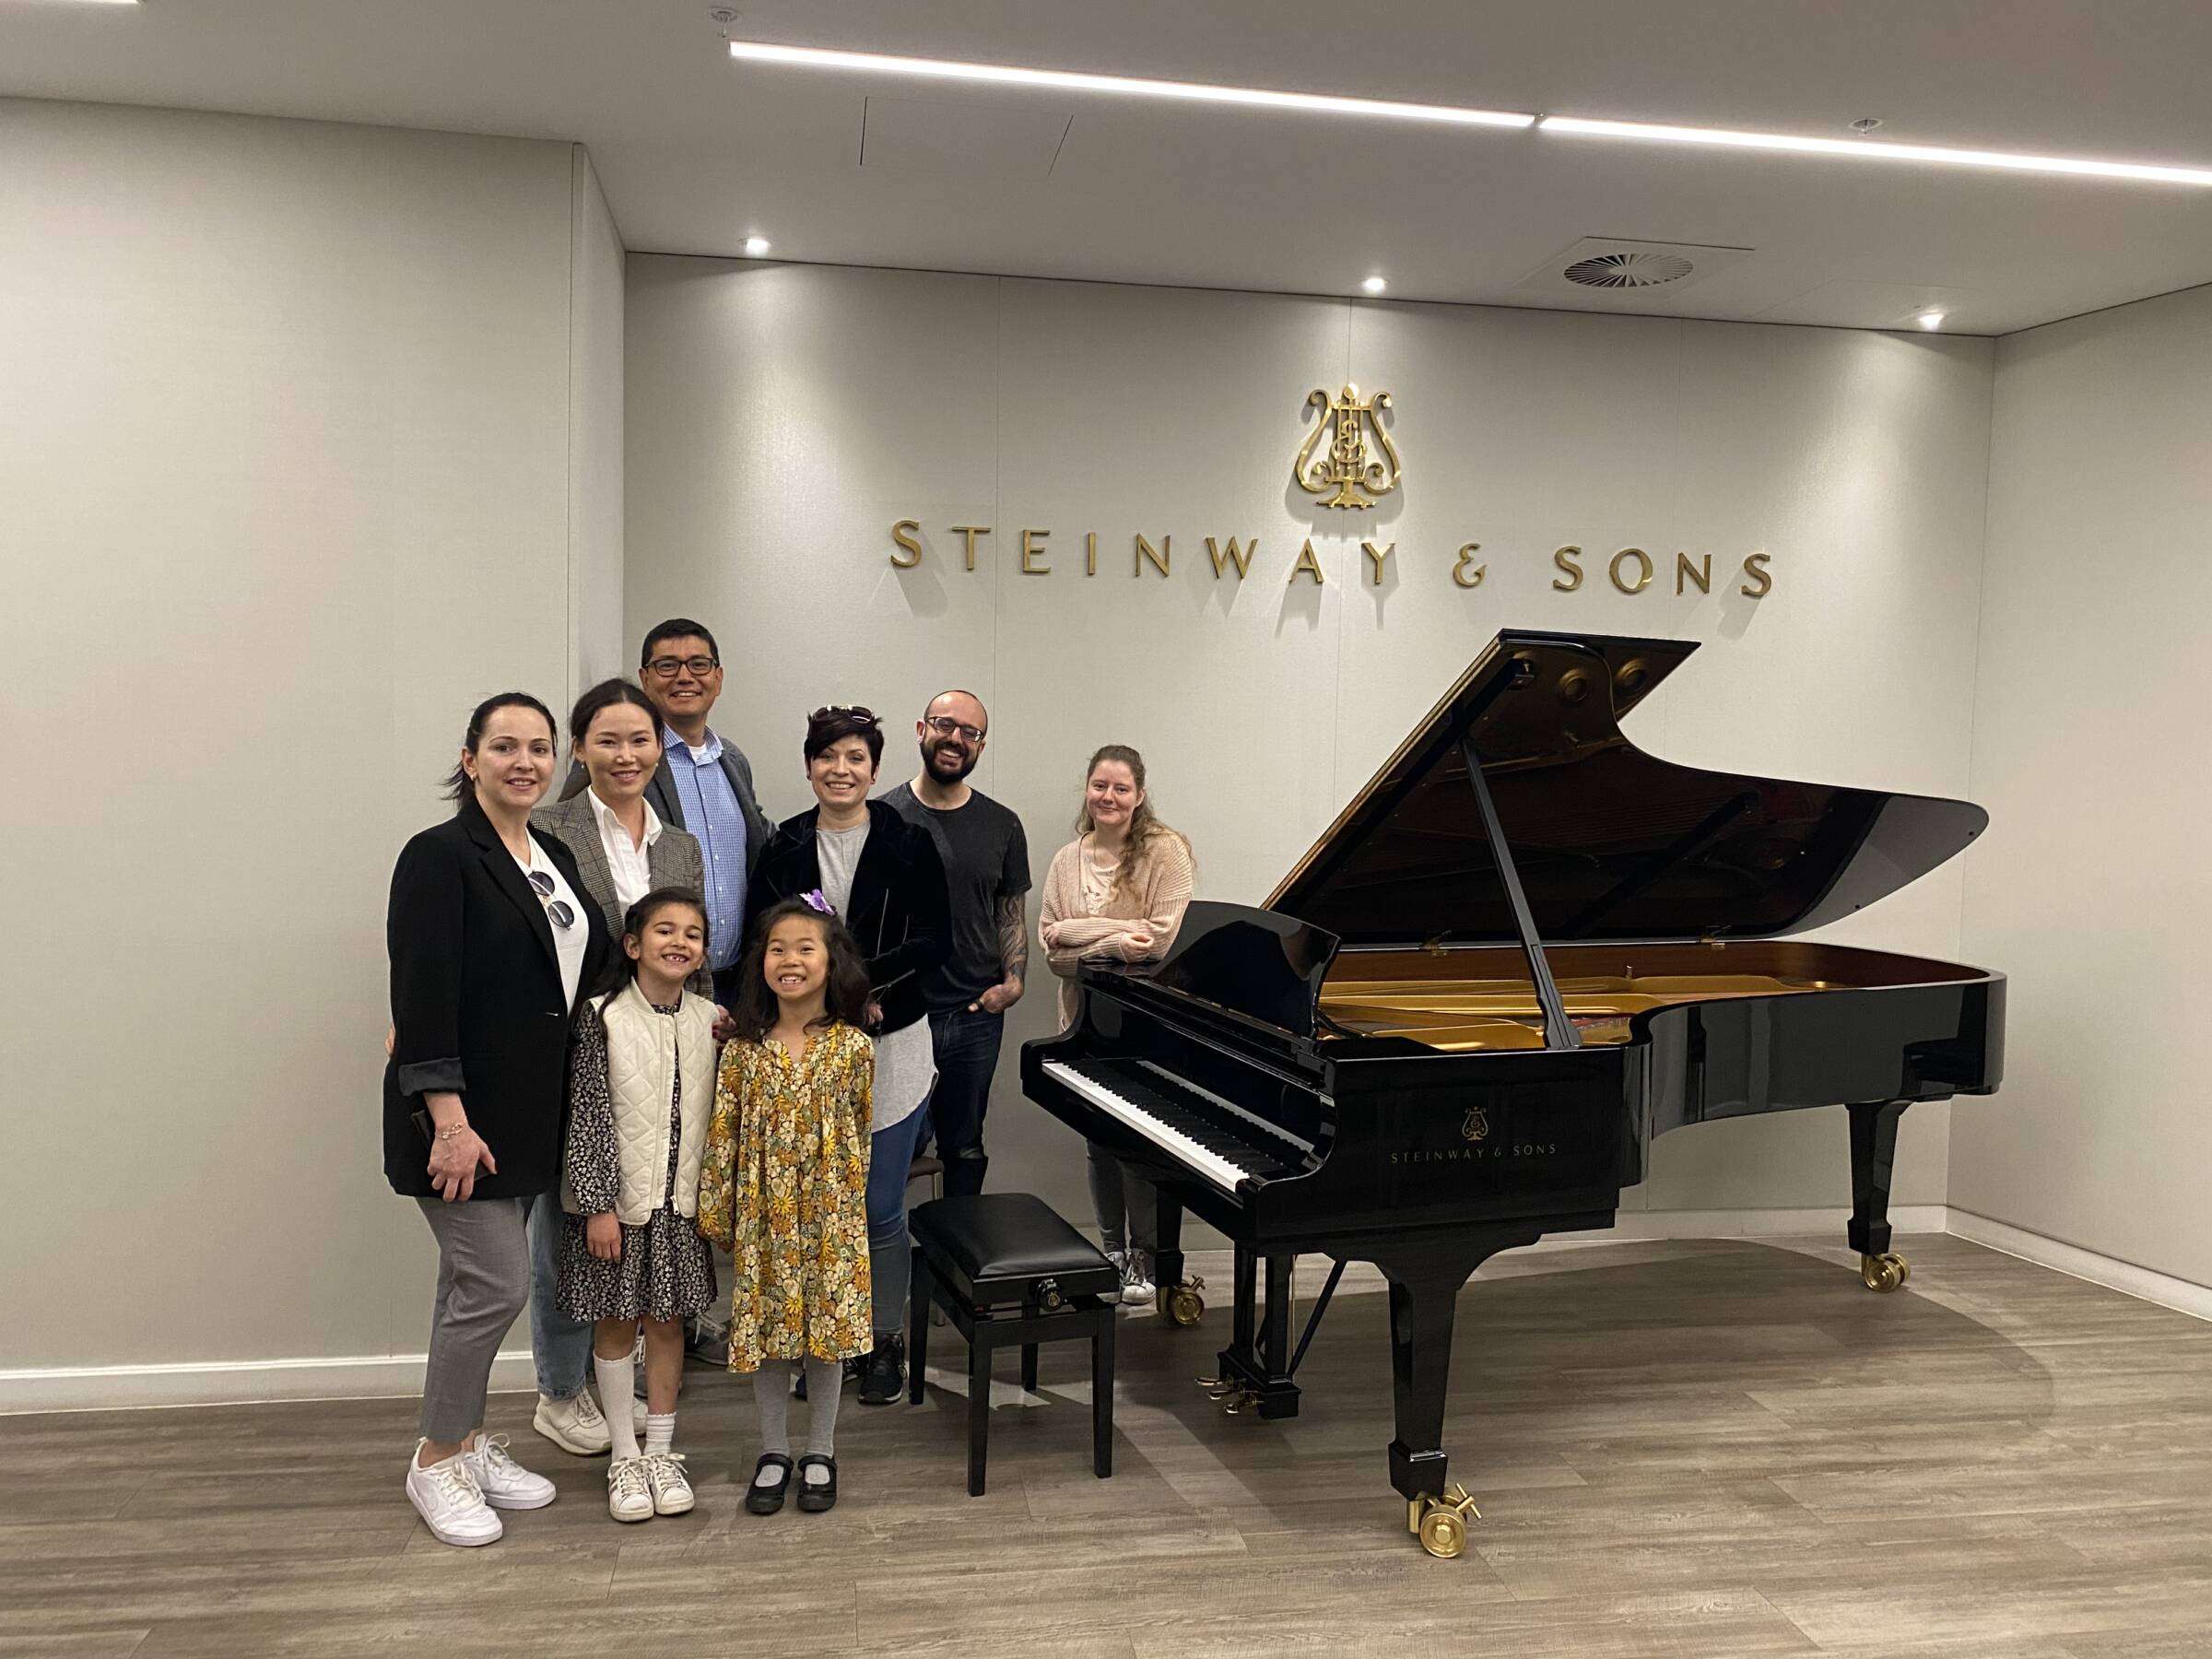 We were delighted to be able to visit the iconic Steinway Hall in London and to see lots of beautiful pianos made by Steinway & Sons.